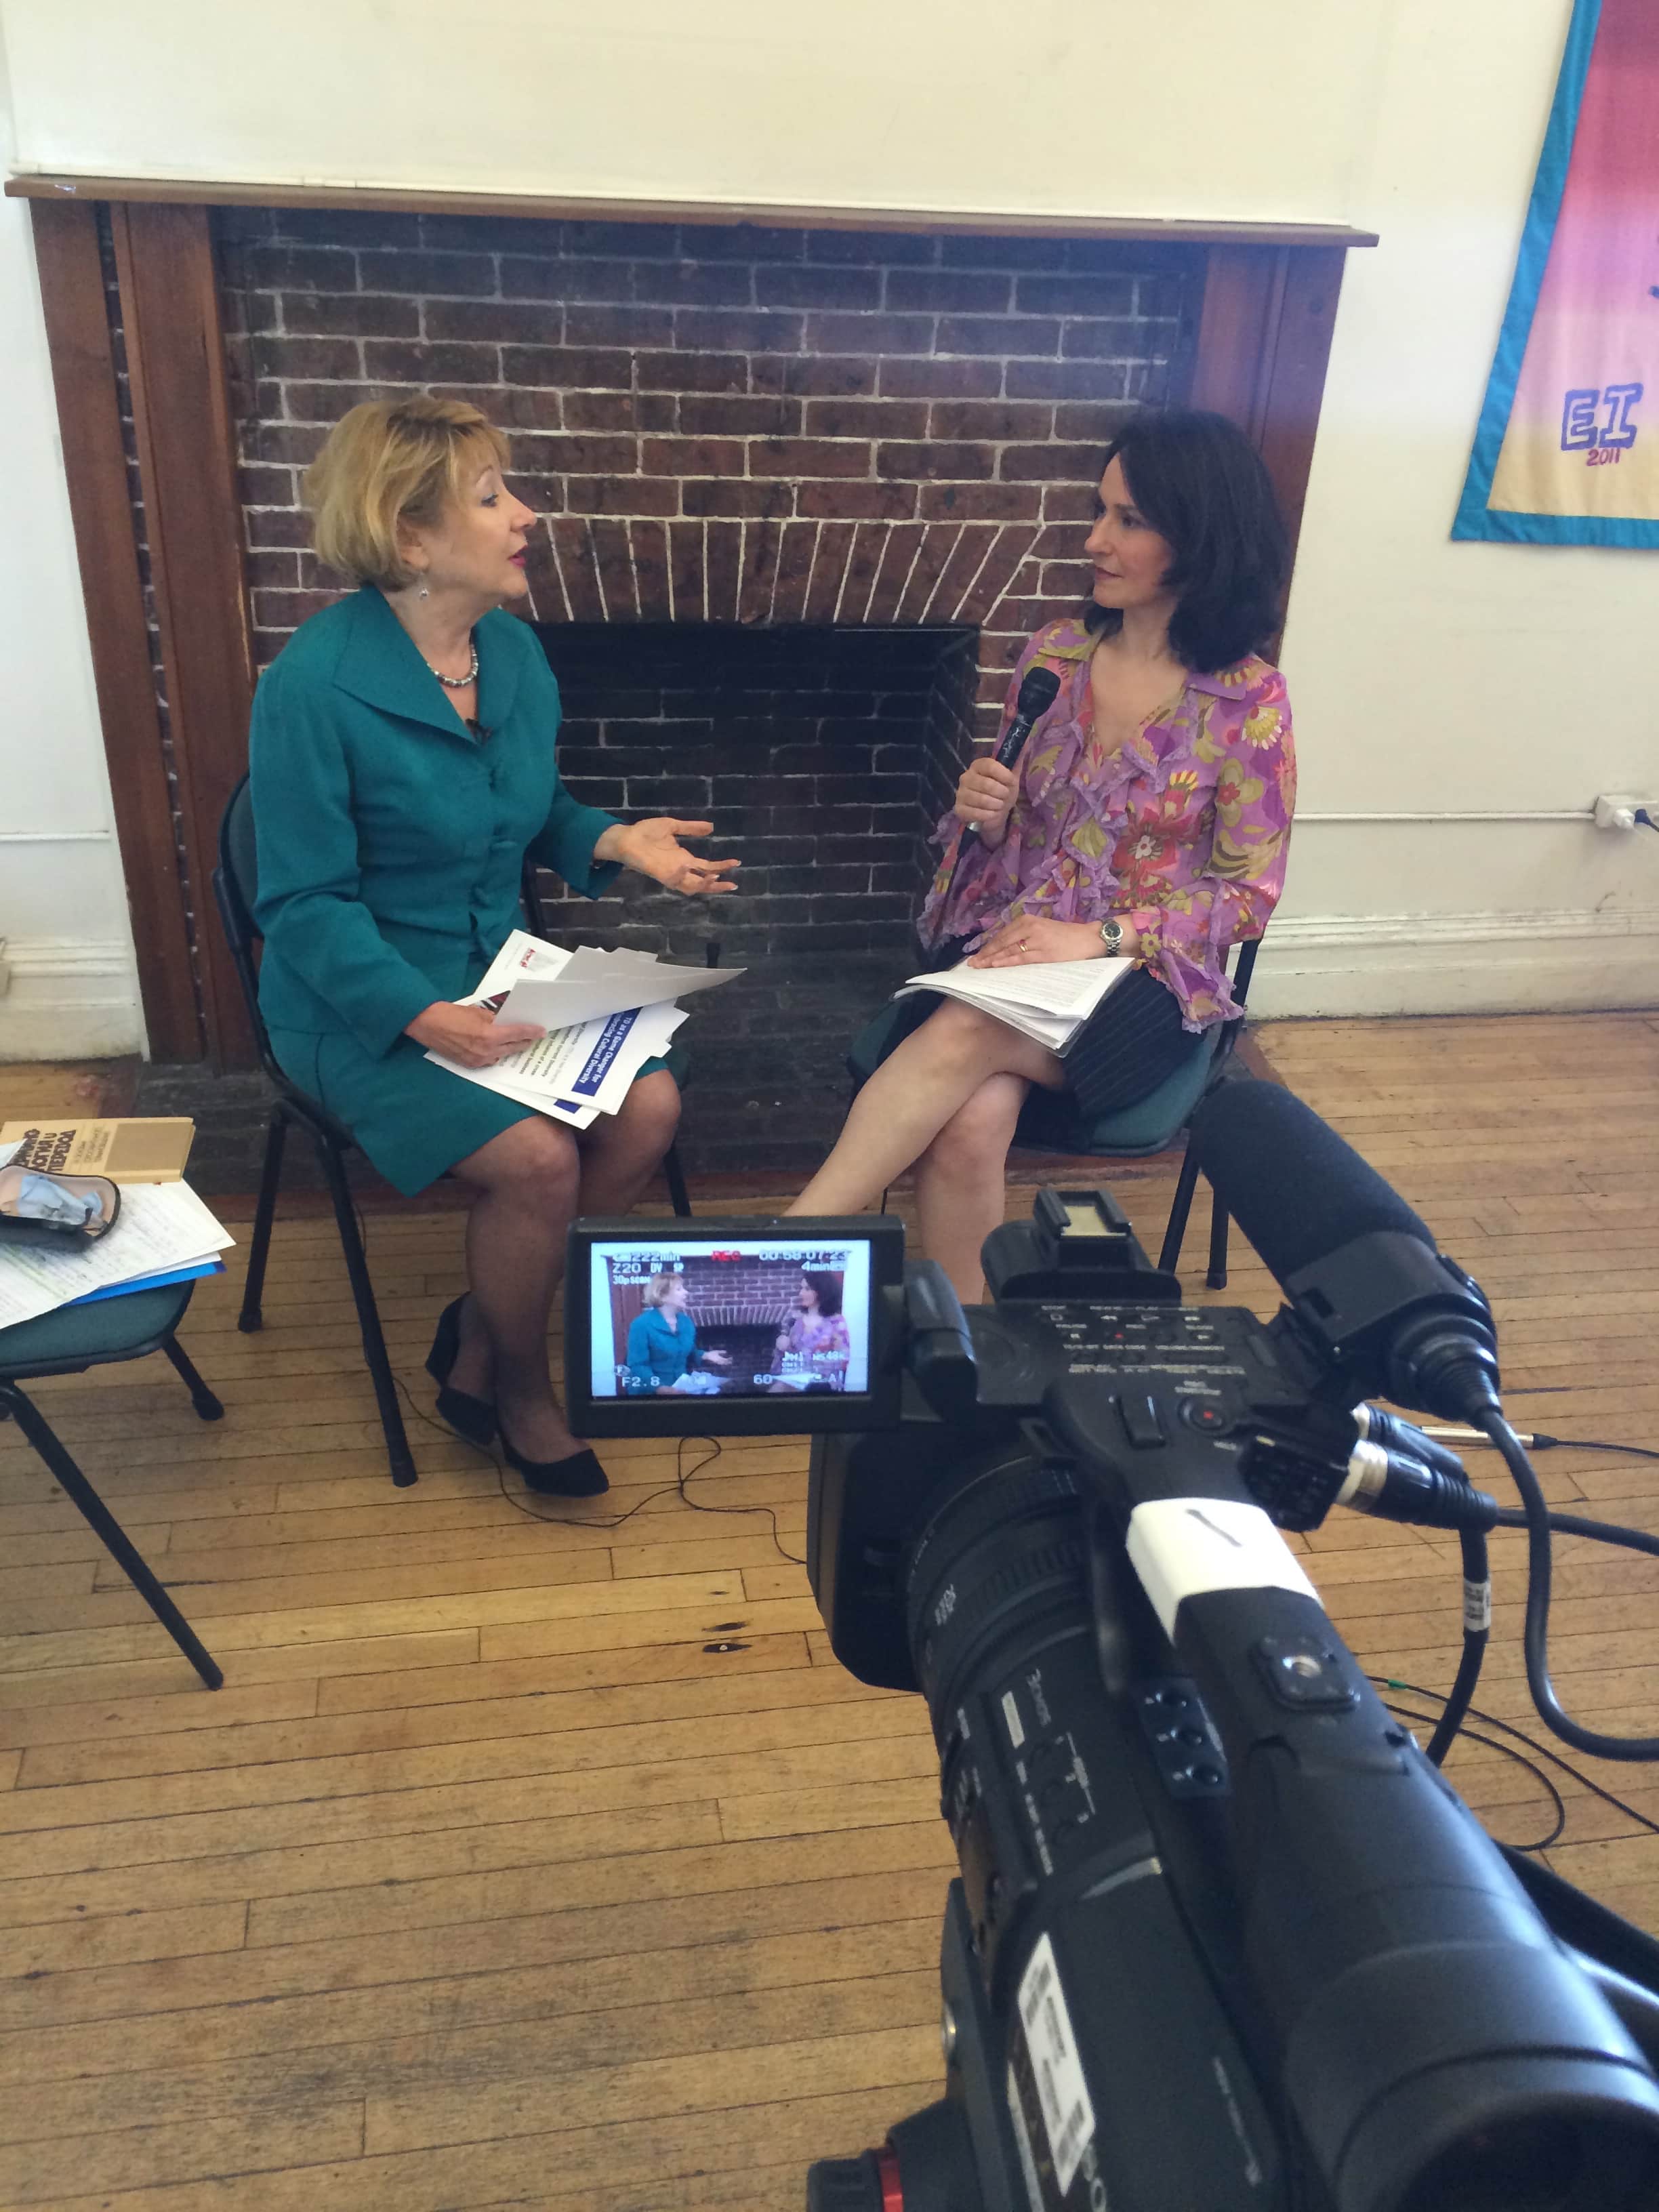 How Immigrant Women Make it in America: TV Interview with Dr. Fiona Citkin